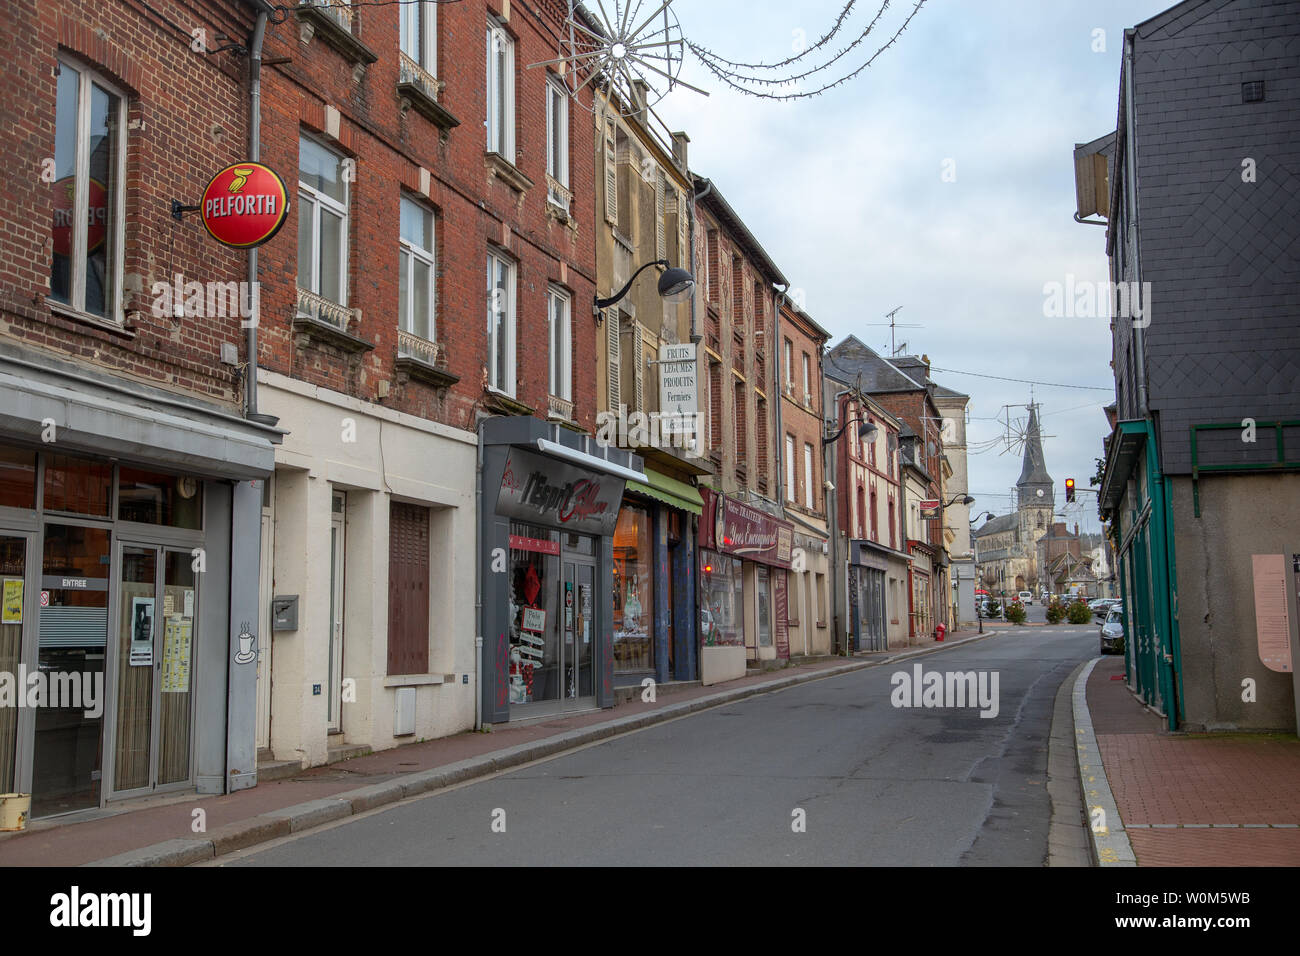 Livarot, France - January 2, 2019: typical buildings and streets of Livarot with no people. Its known for the production of the Livarot cheese. Stock Photo